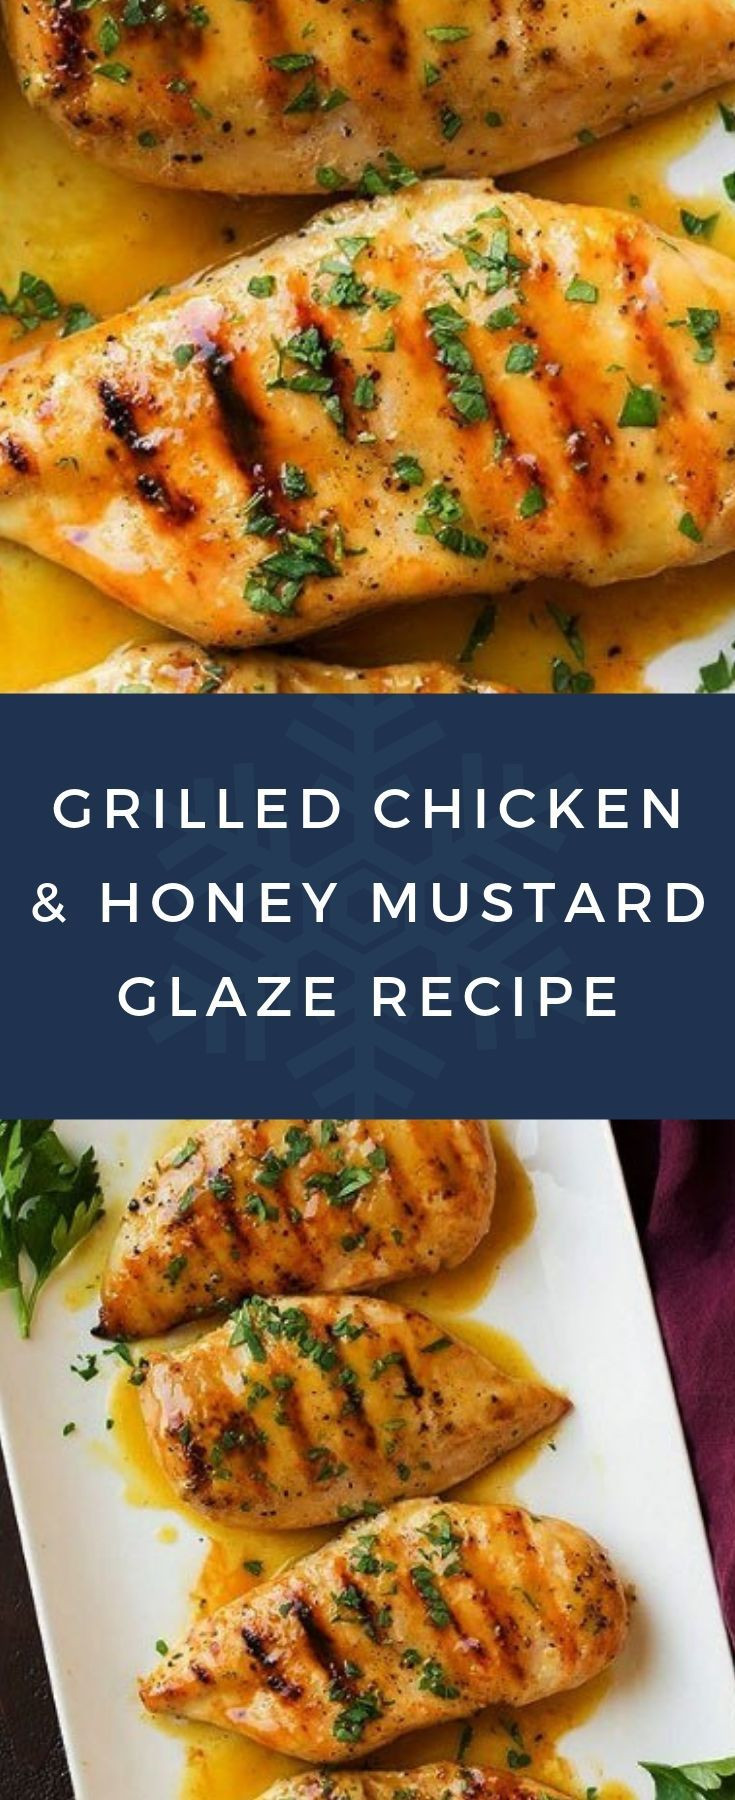 Diabetic Grilled Chicken Recipes
 Grilled Chicken with Honey Mustard Glaze Recipe